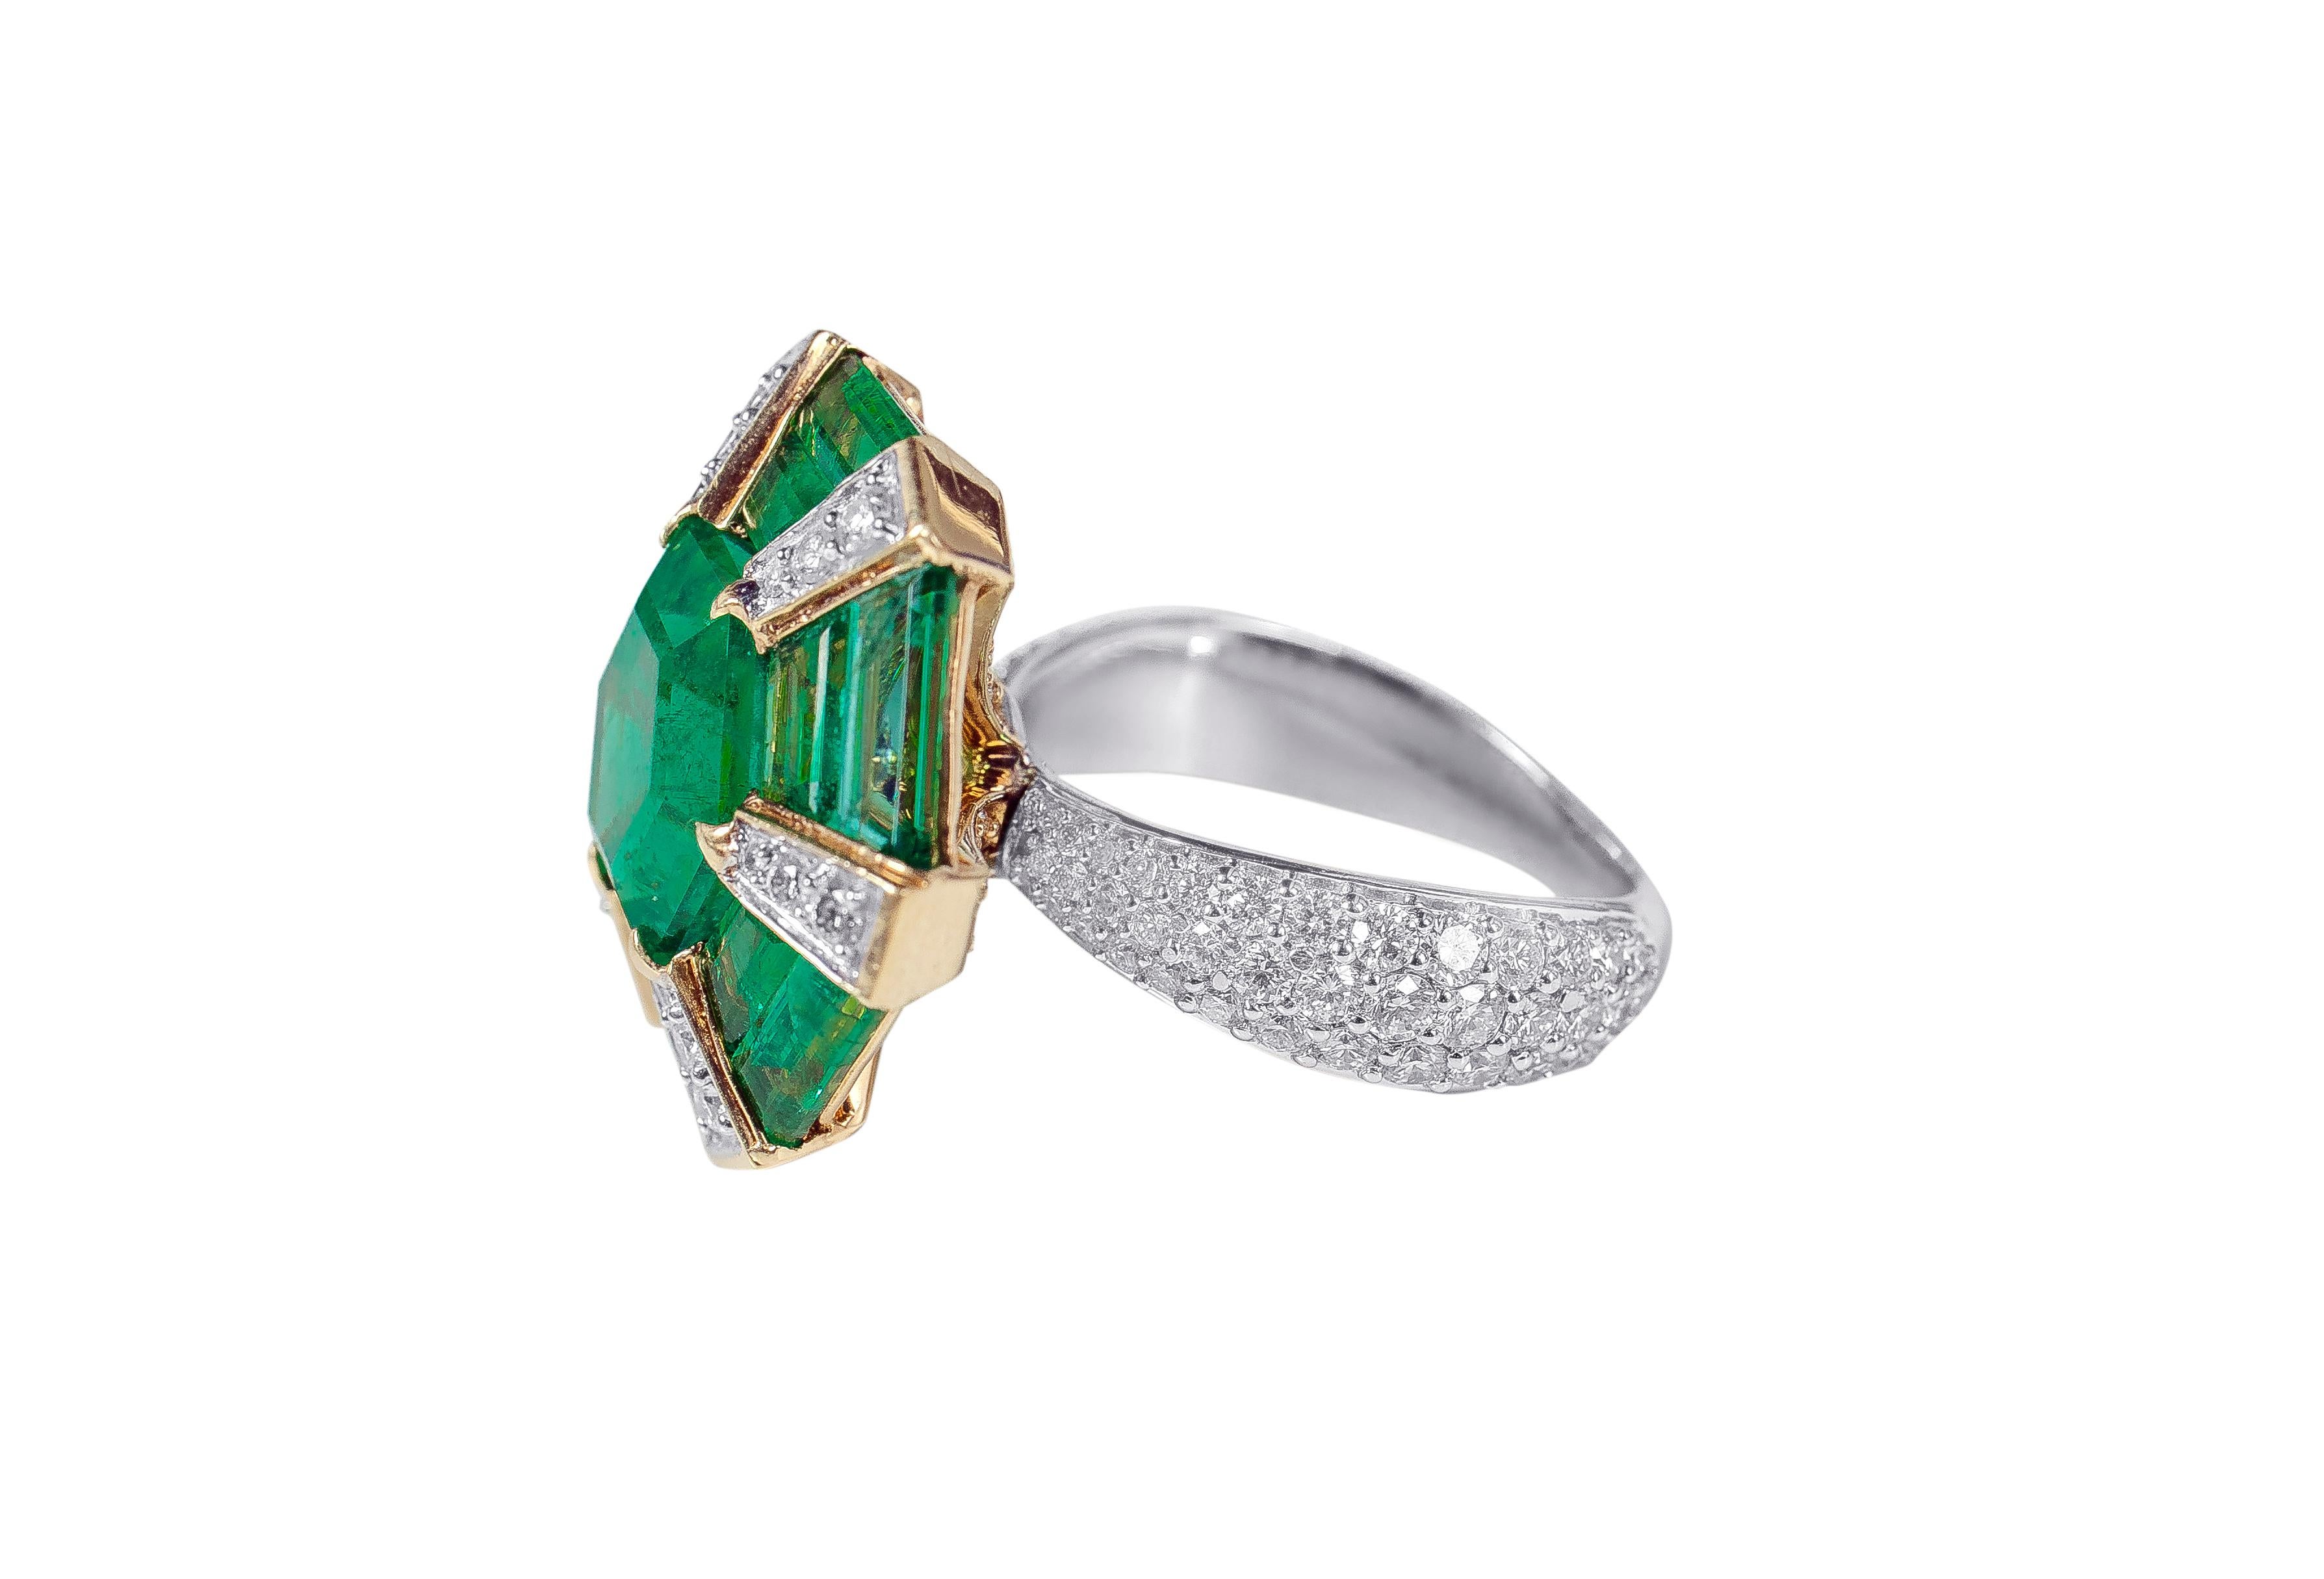 18 Karat White Gold 5.31 Carat Natural Emerald Hexagon and Diamond Cocktail Ring

This extraordinary gleaming green emerald hexagon dreamy ring is encapsulating. The center exquisite special solitaire hexagon emerald cut sets the tone for the ring